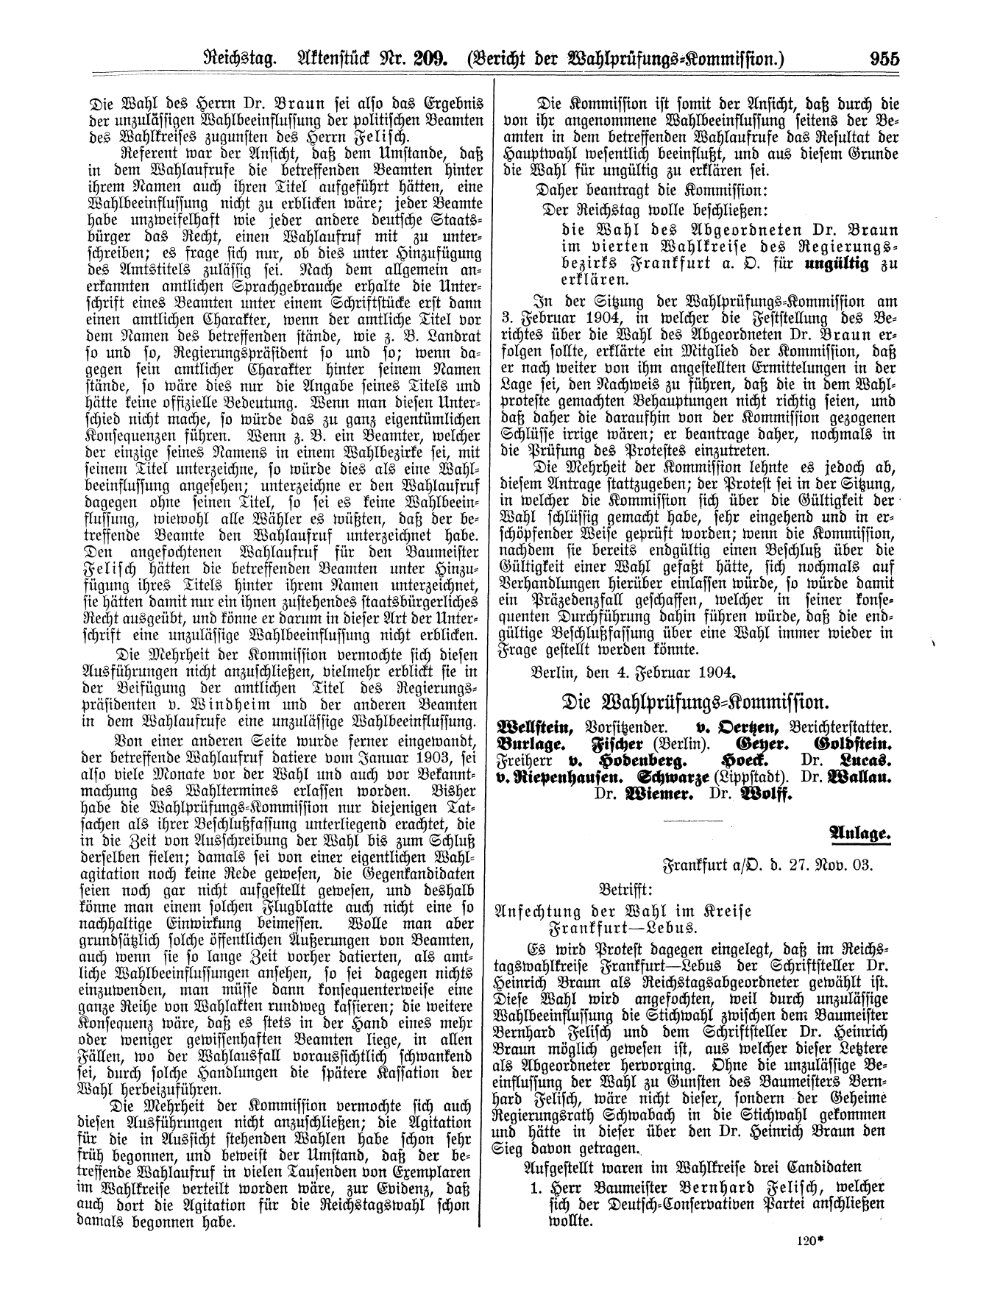 Scan of page 955